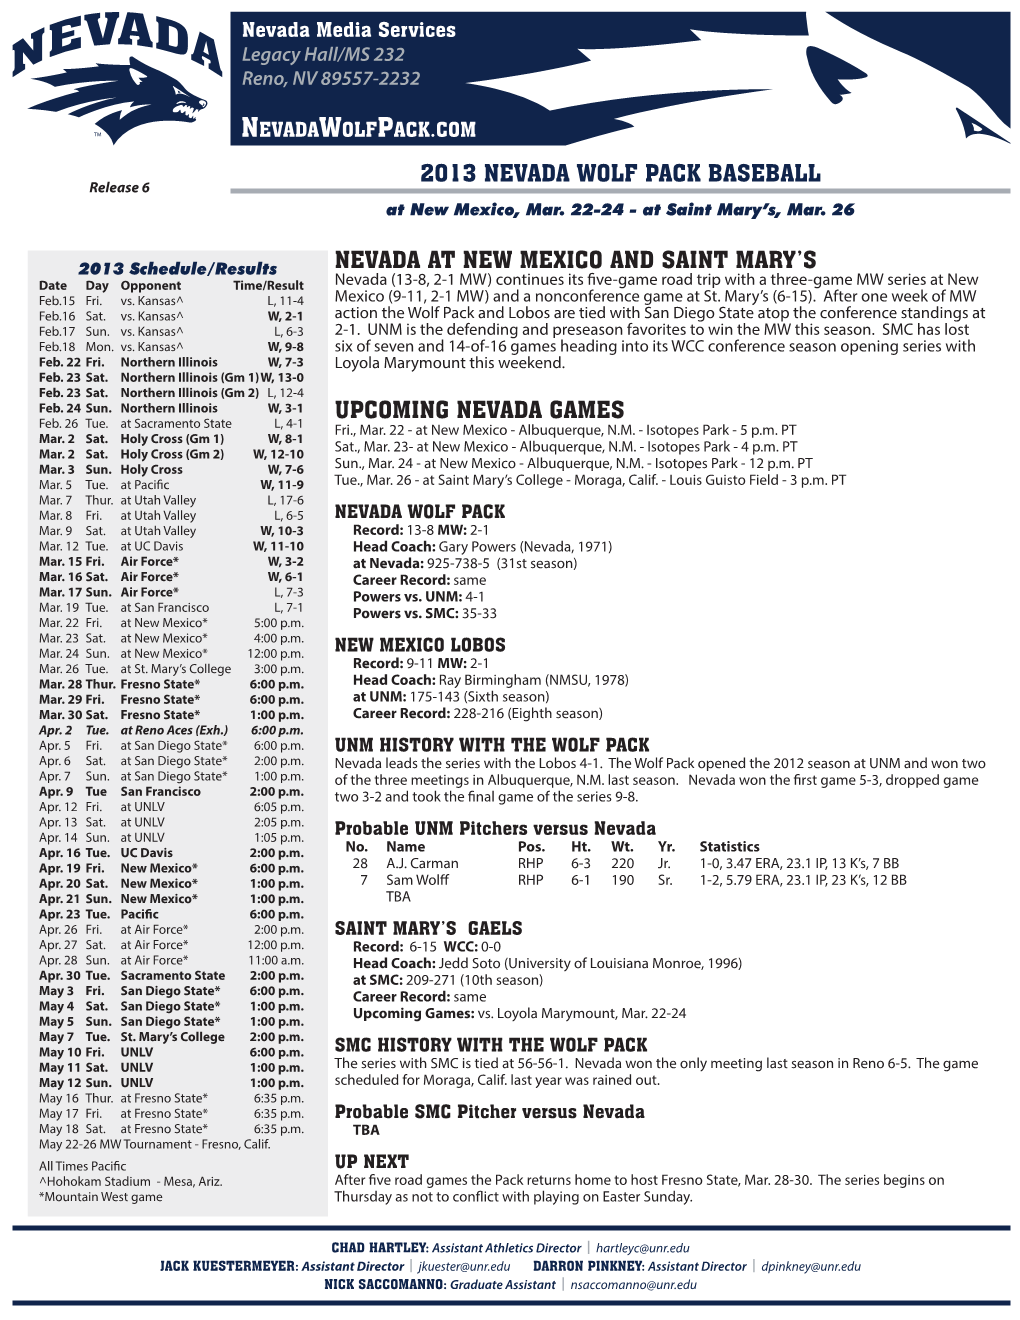 Release 6 2013 NEVADA WOLF PACK BASEBALL at New Mexico, Mar